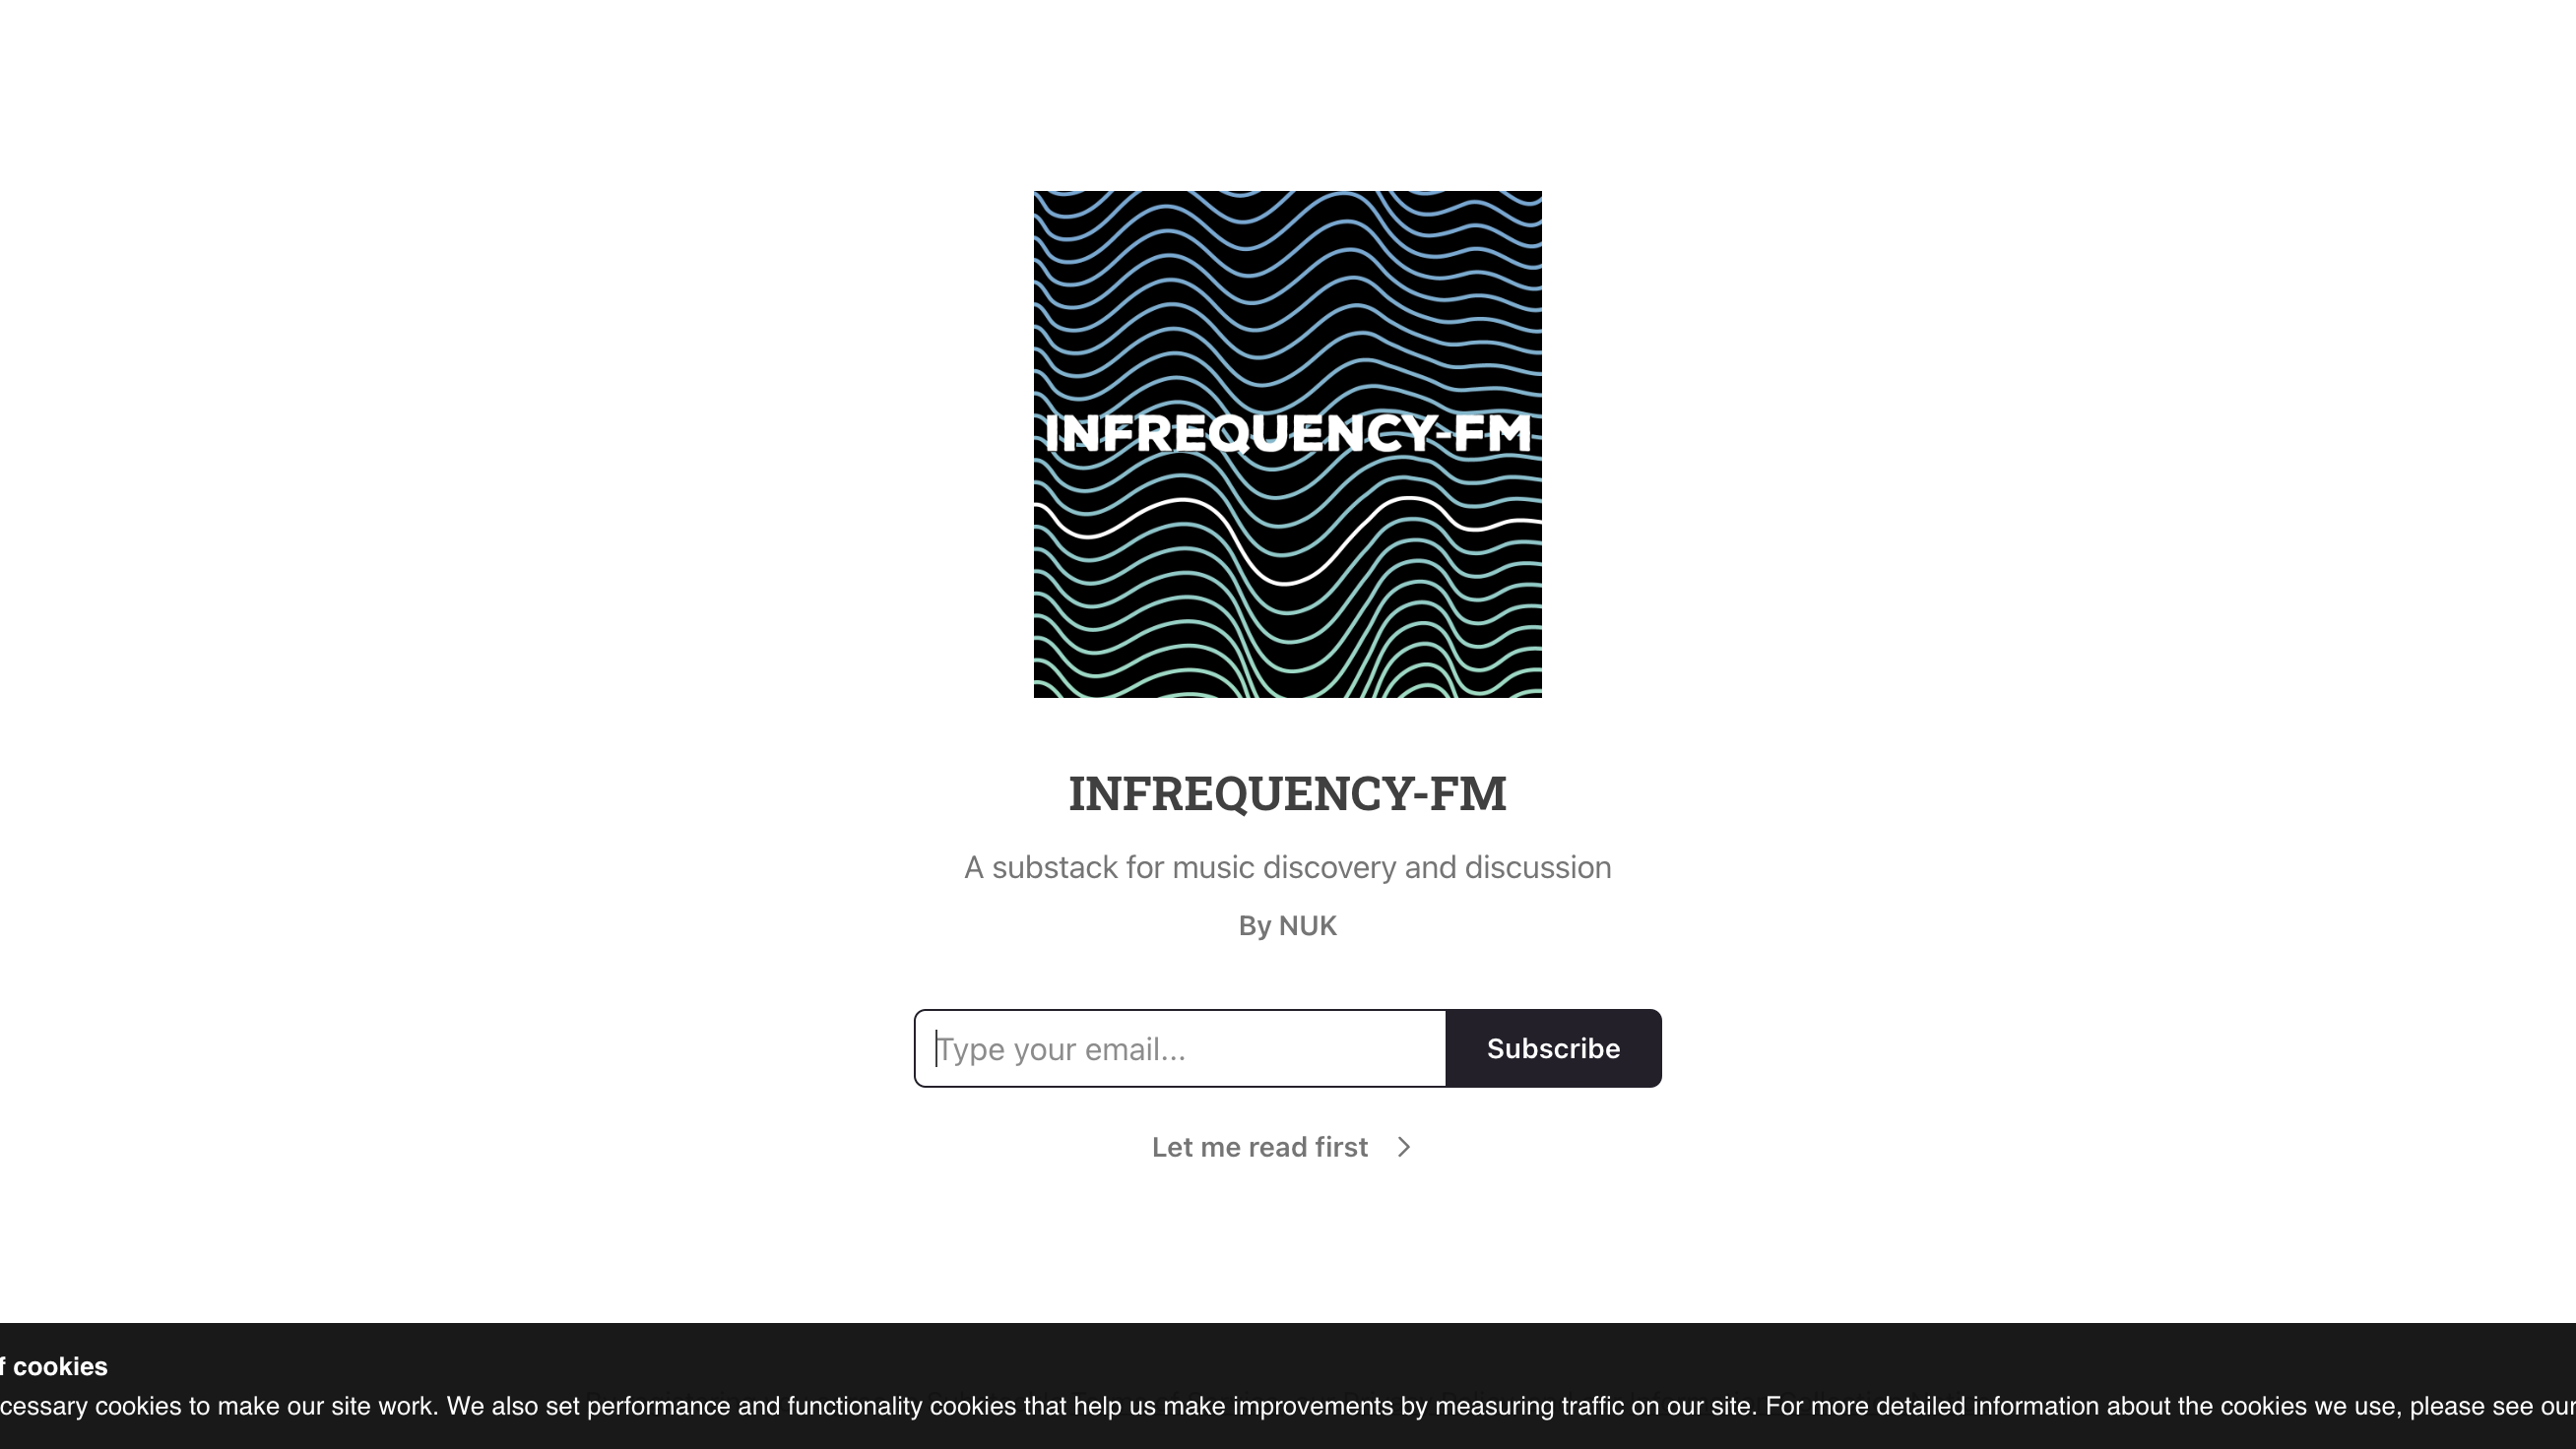 INFREQUENCY FM homepage